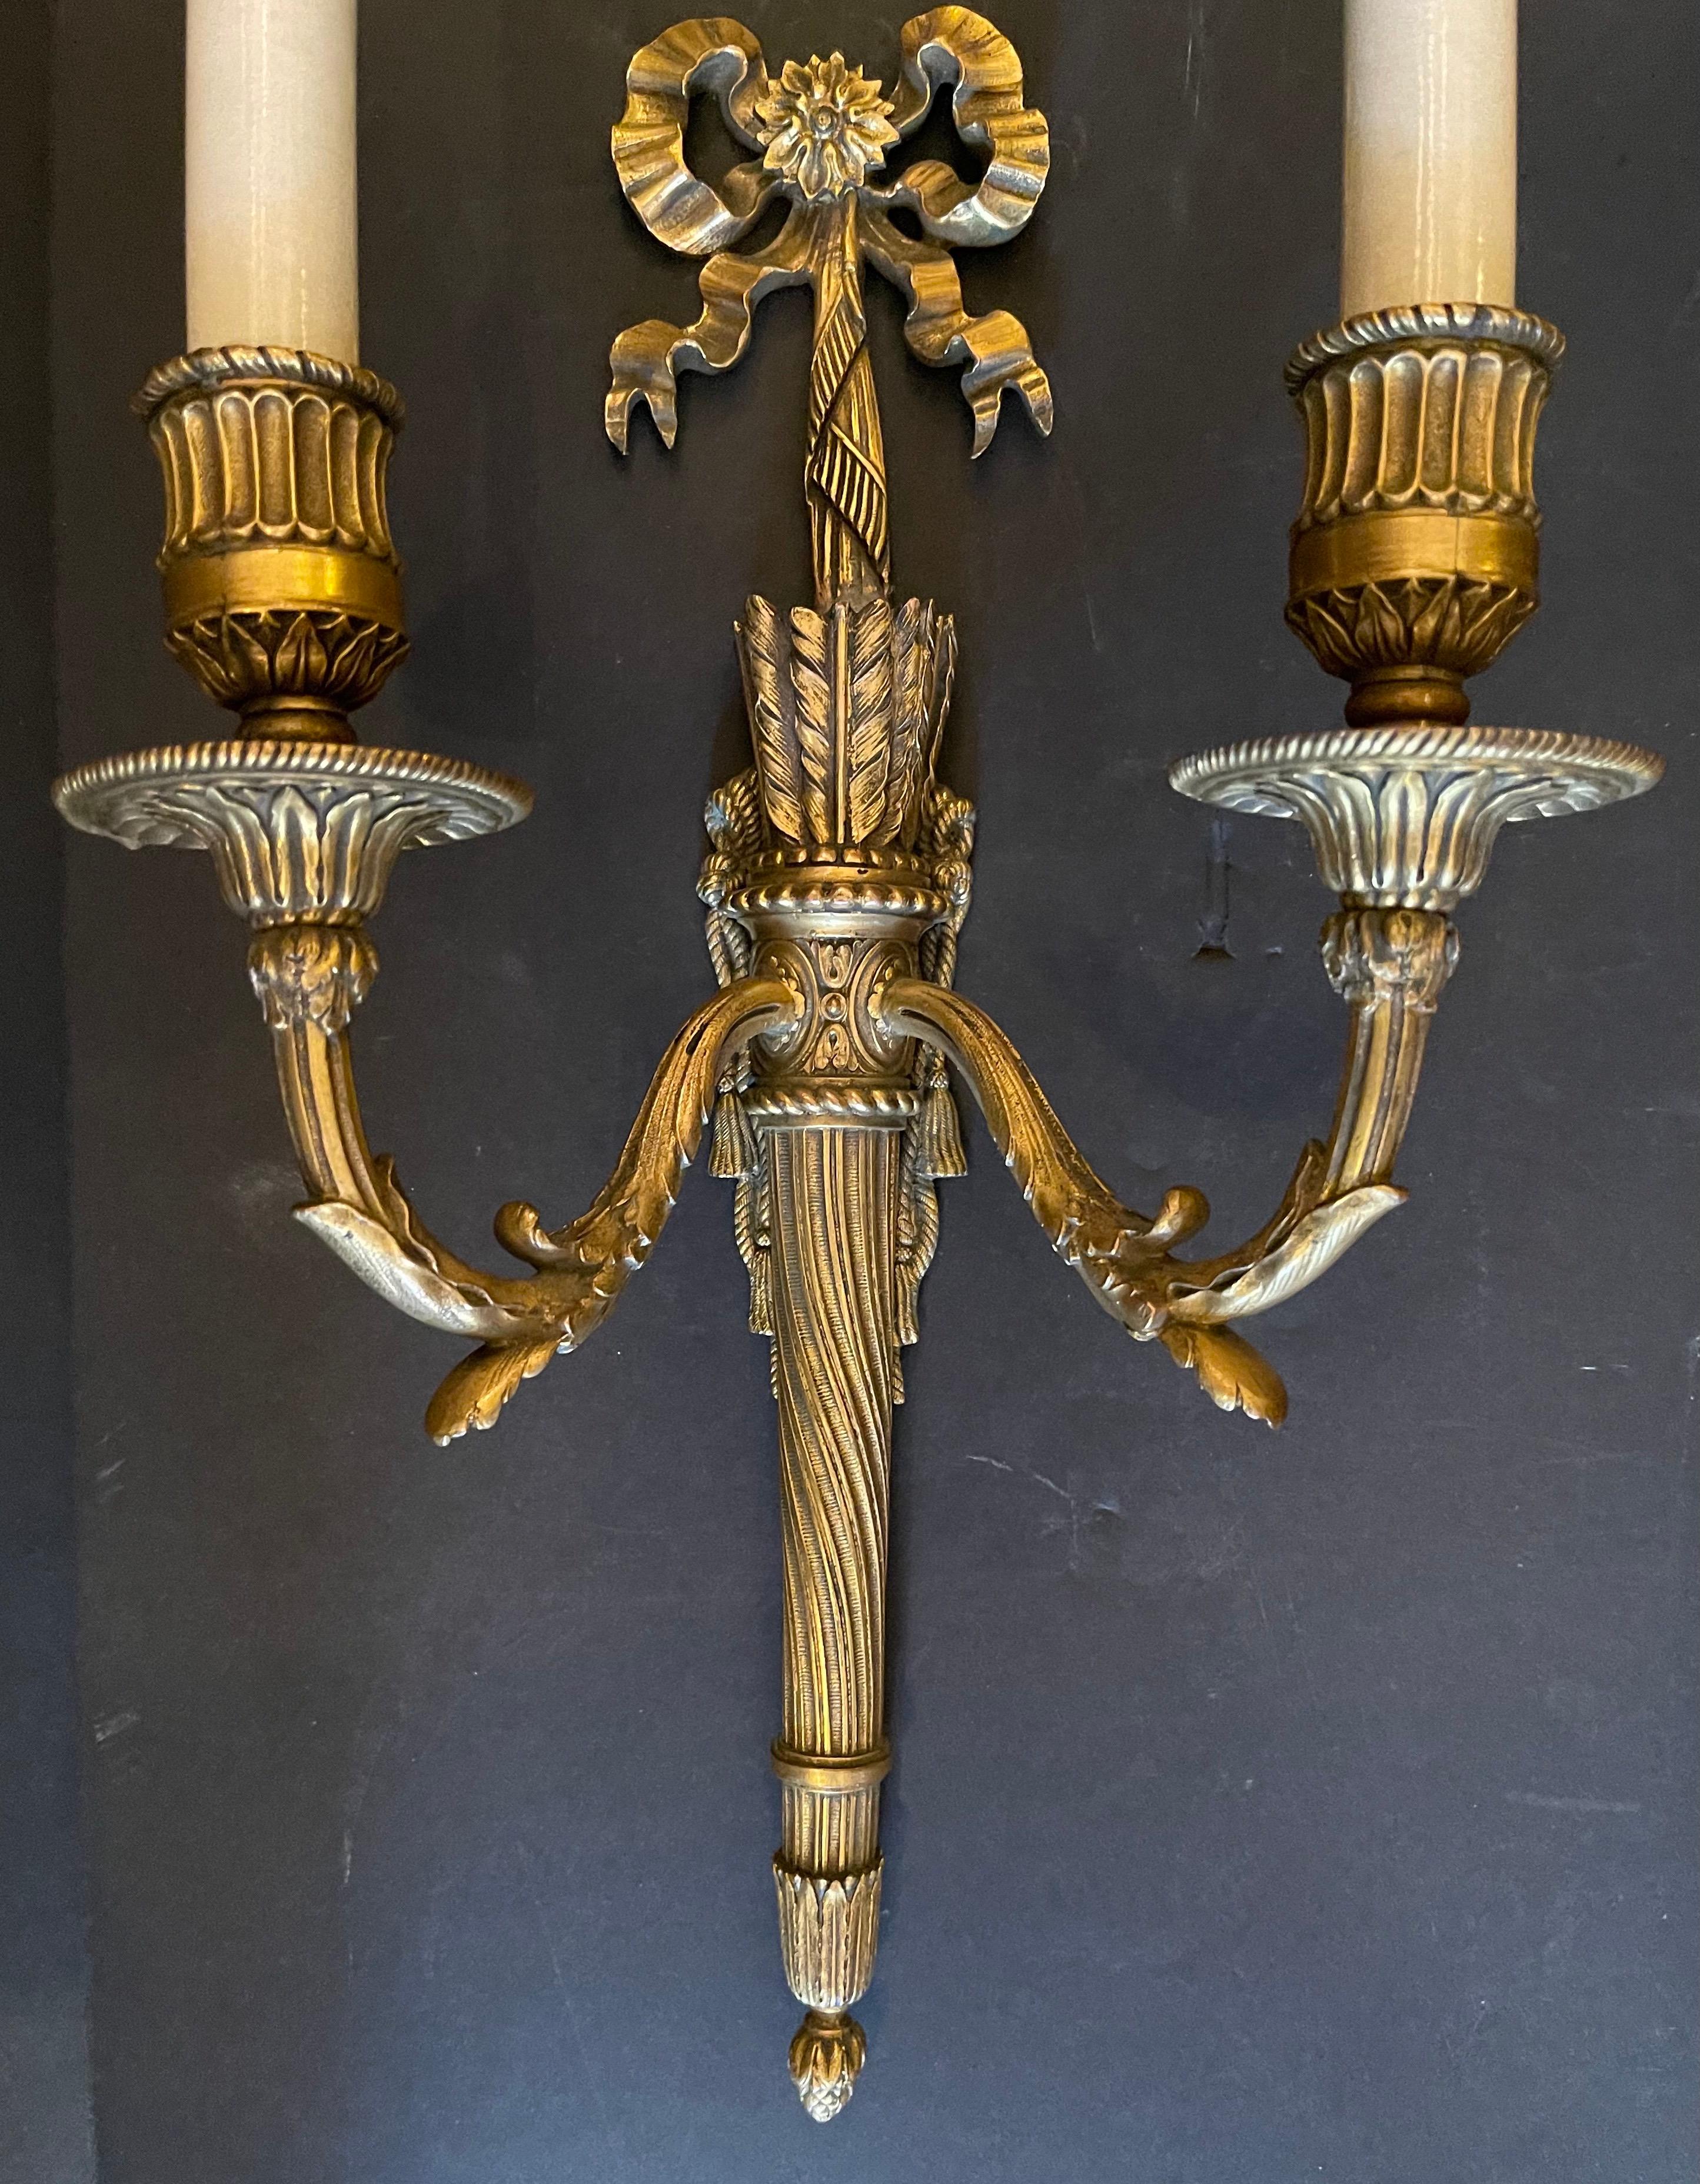 20th Century Wonderful Pair French Gilt Doré Bronze Bow Torchiere Caldwell Two-Light Sconces For Sale